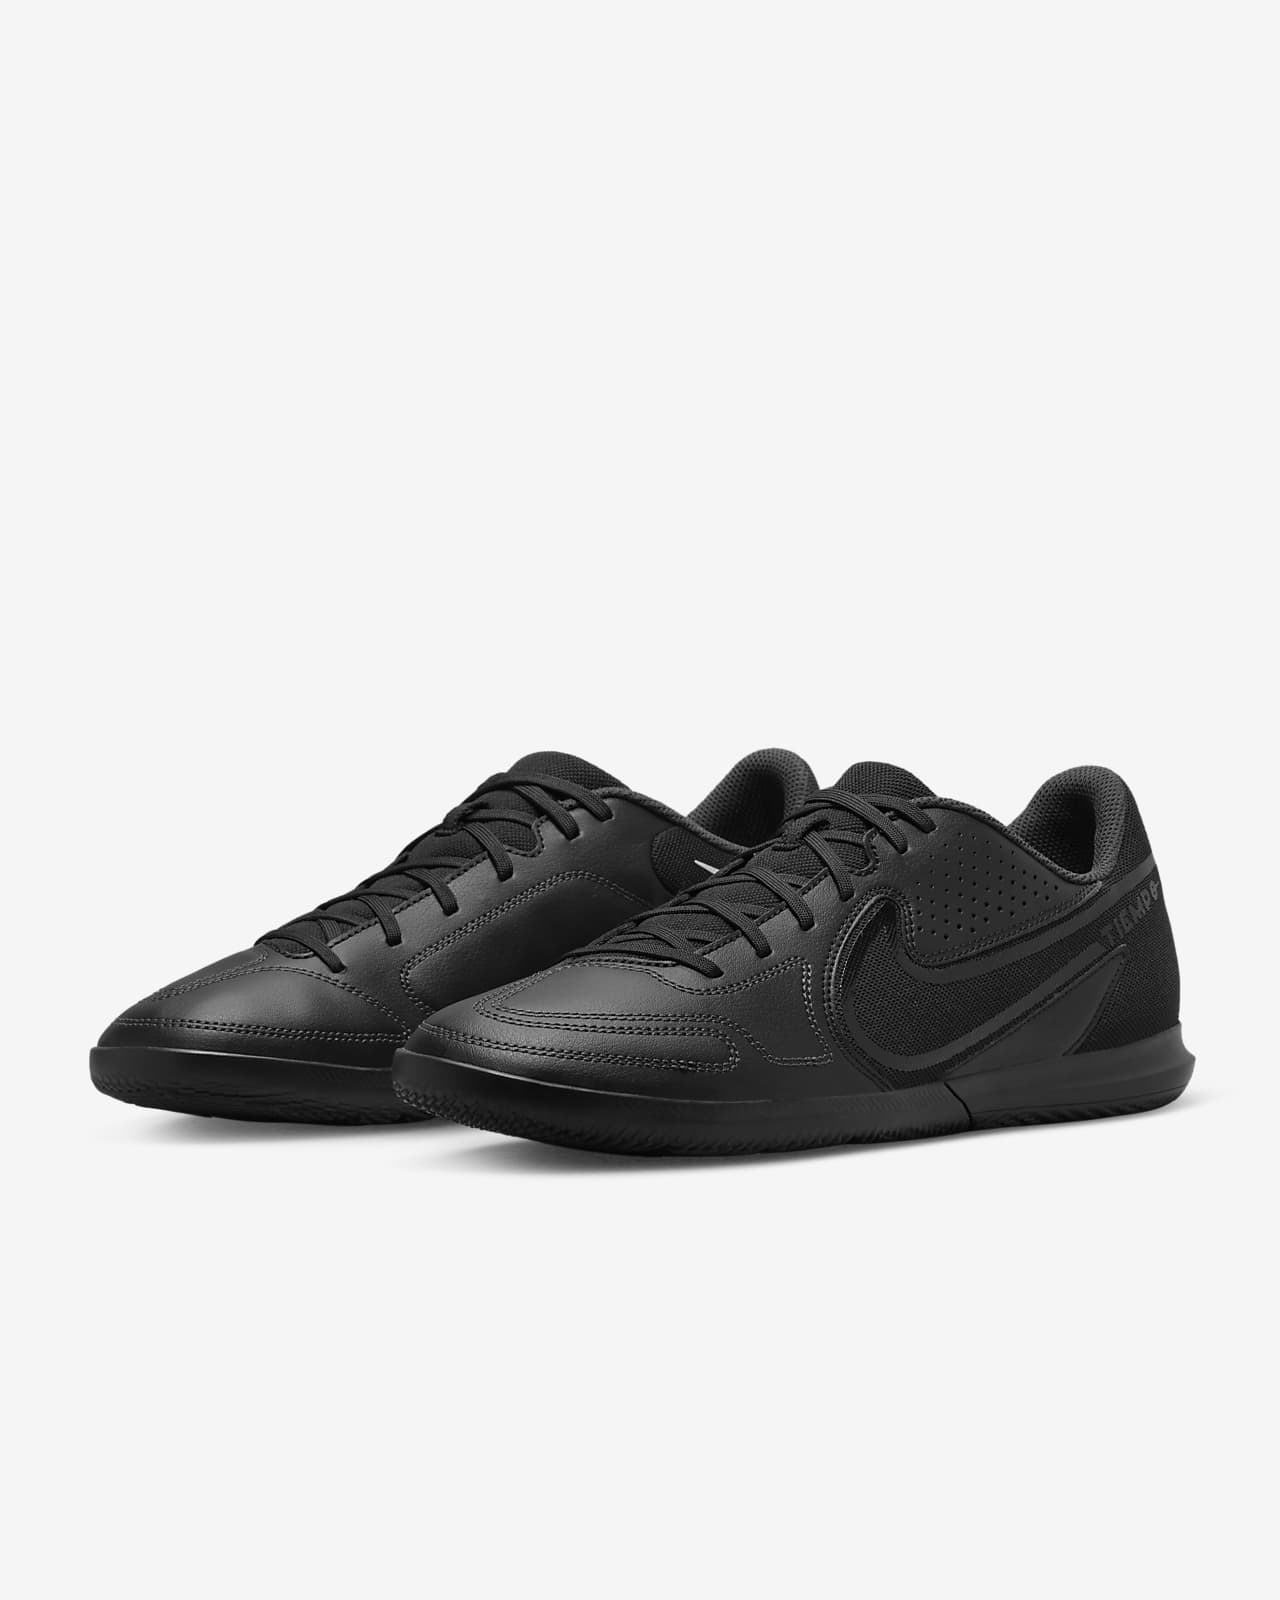 NIKE Tiempo Legend Club IC Indoor/Court Soccer Shoe Football Shoes For ...